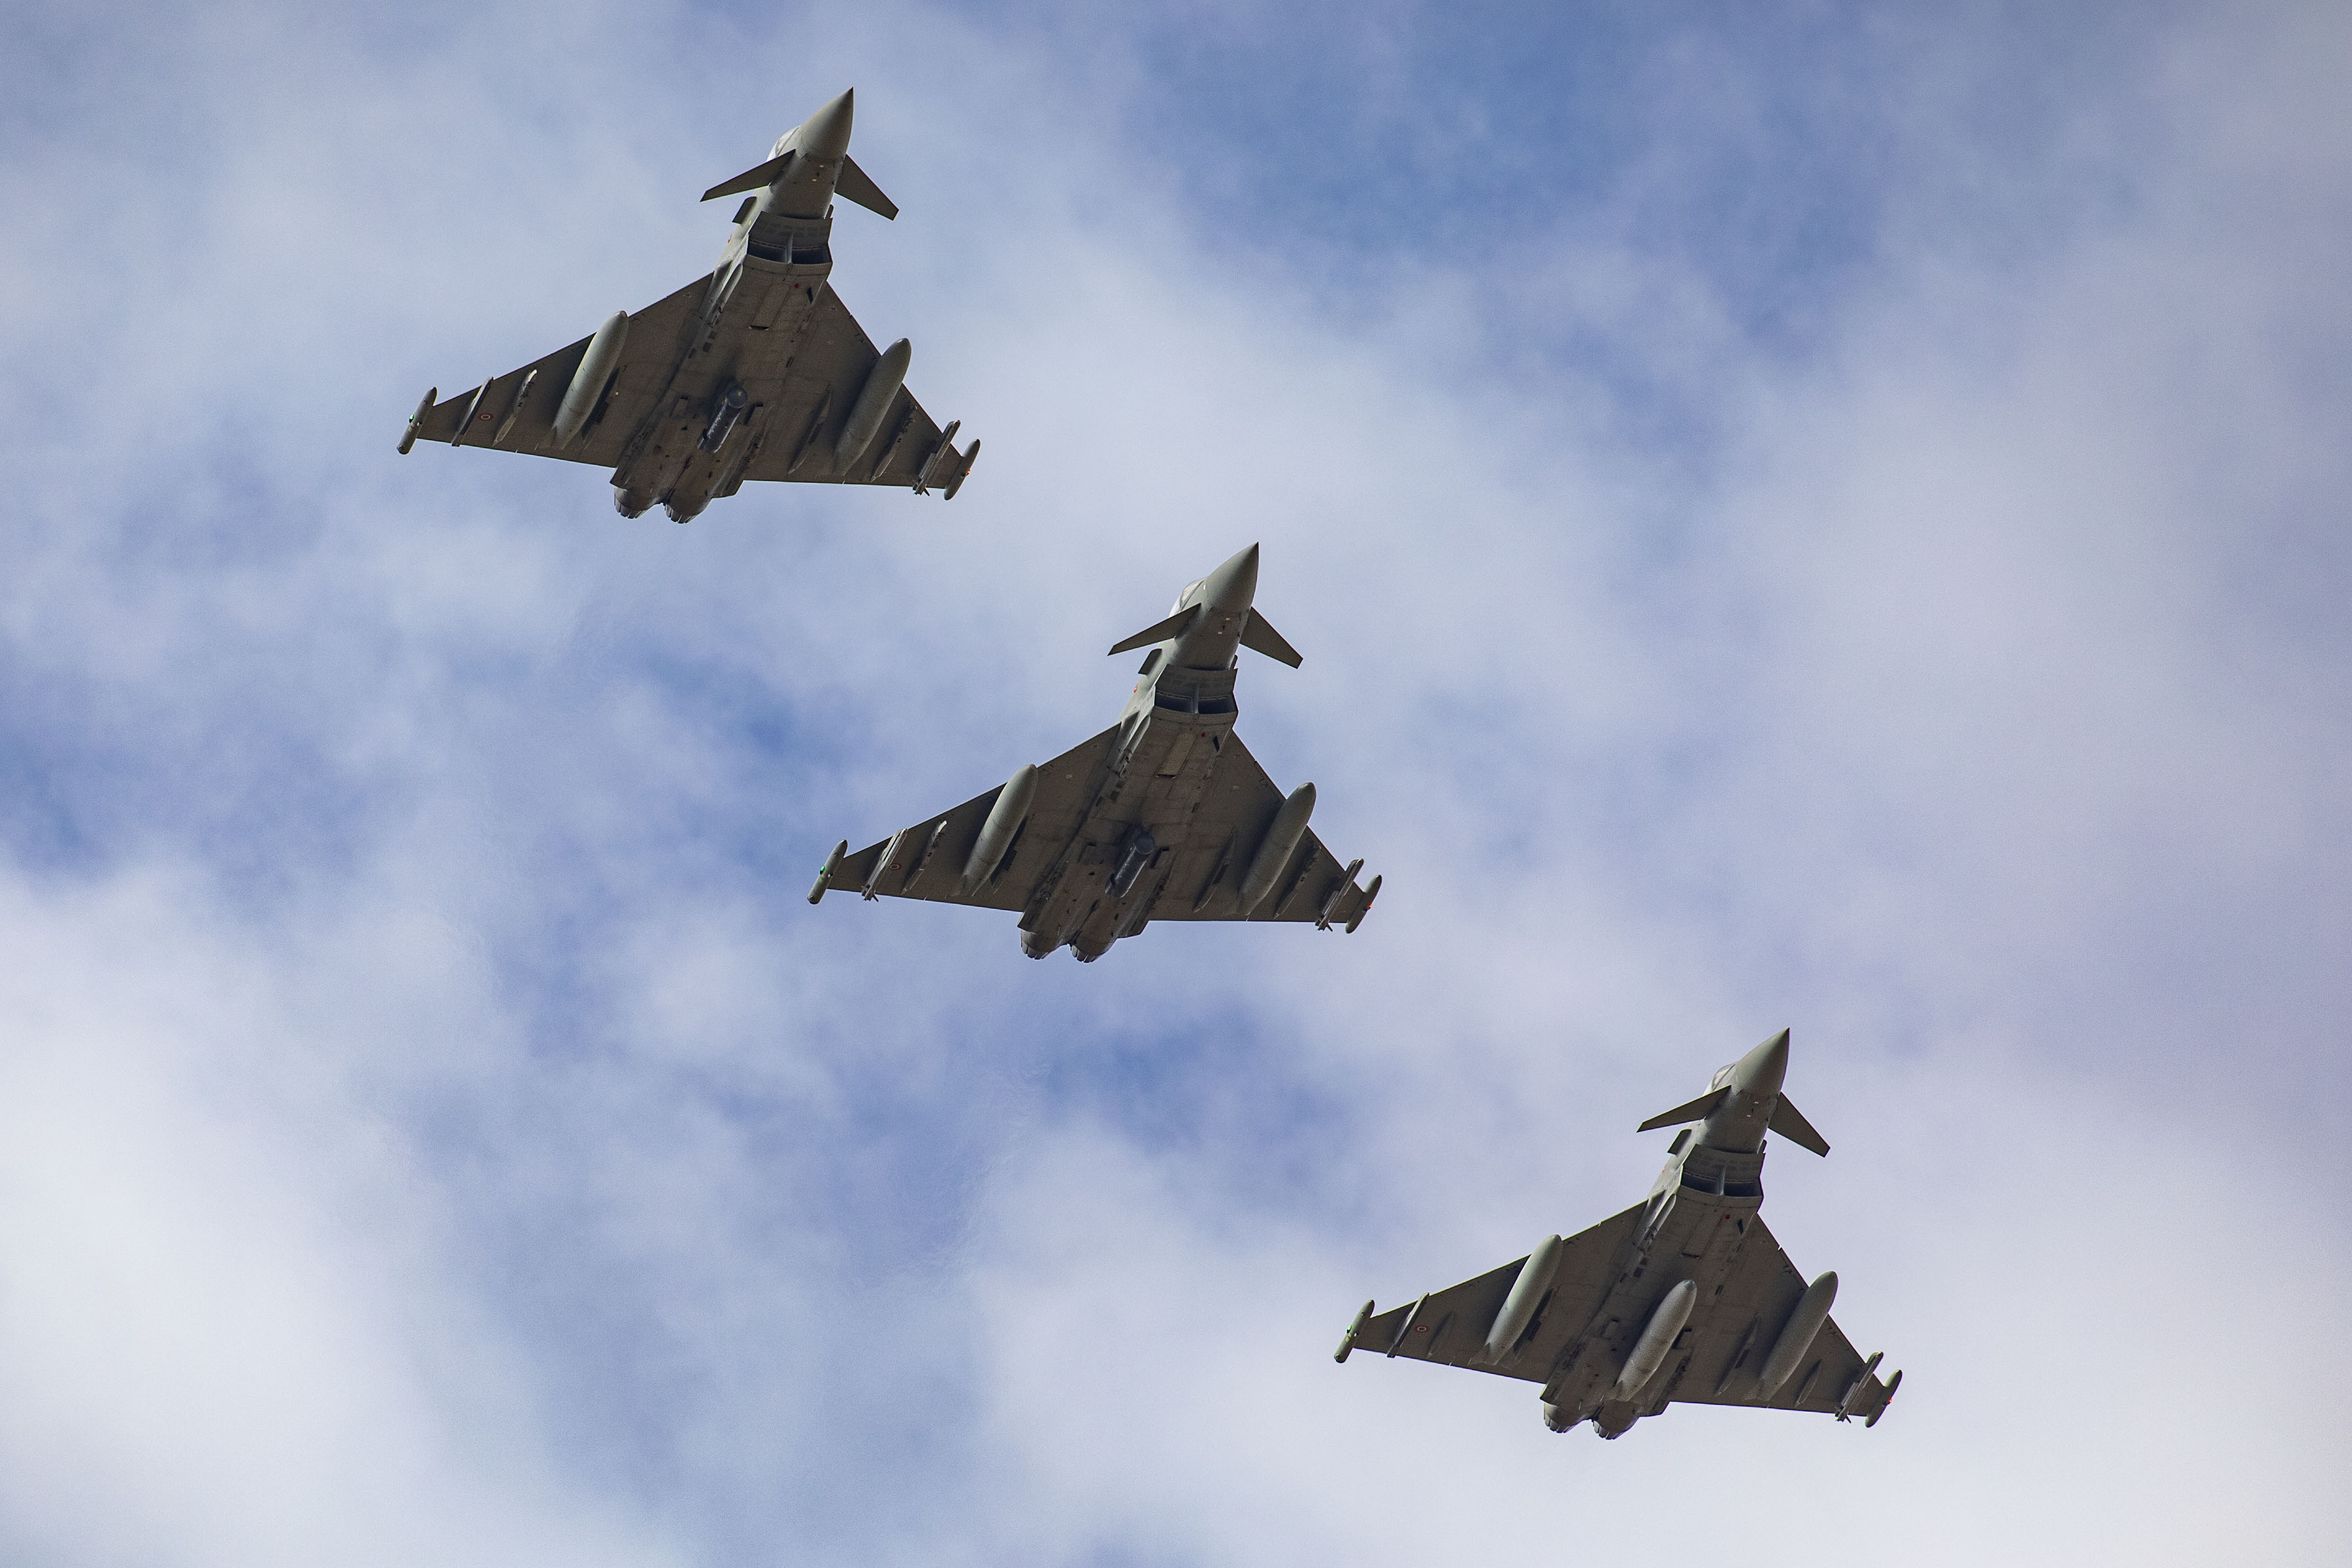 Image shows three aircraft in flight.